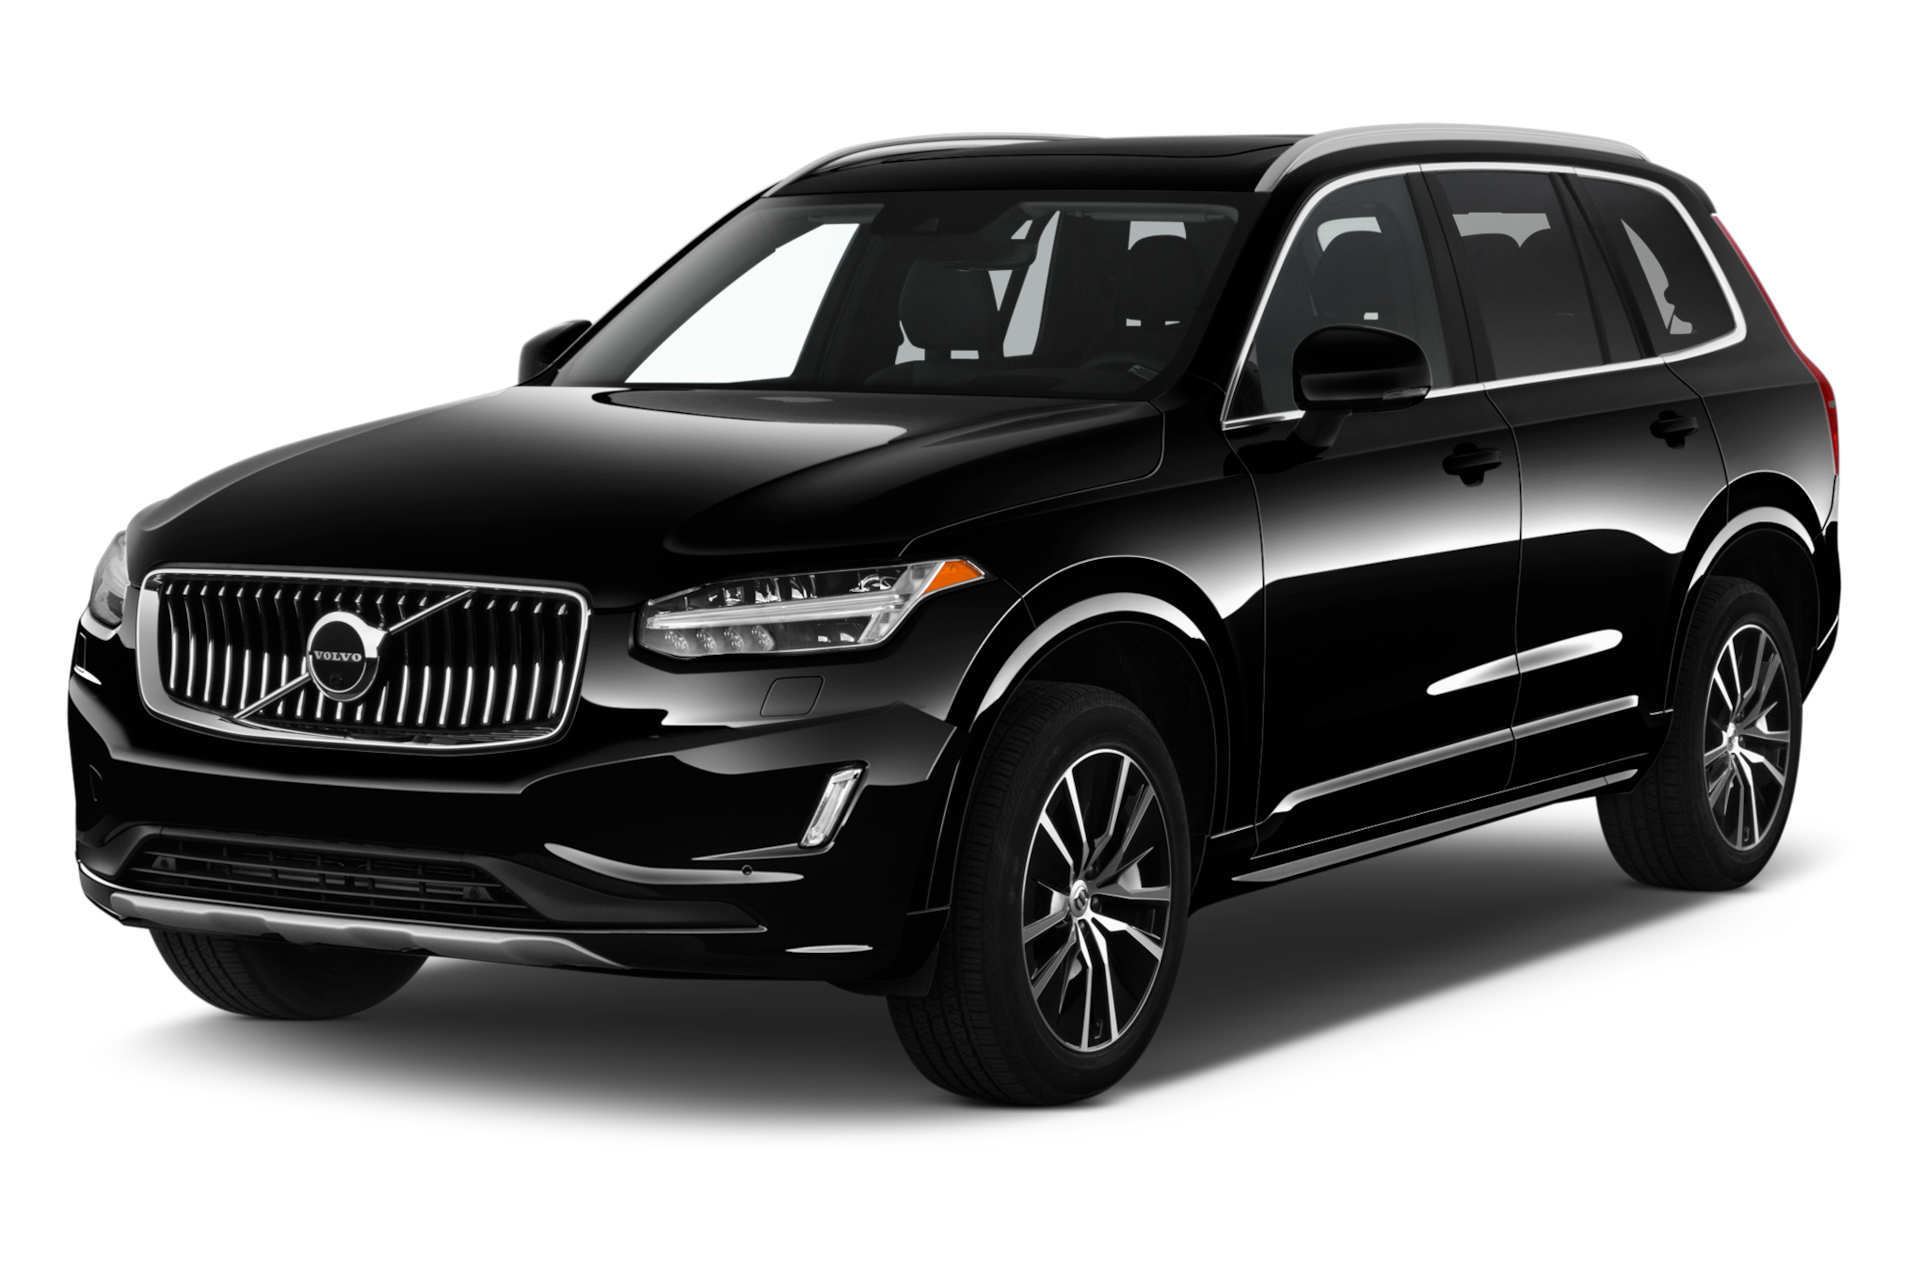 2022 Volvo XC90 Prices, Reviews, and Photos - MotorTrend